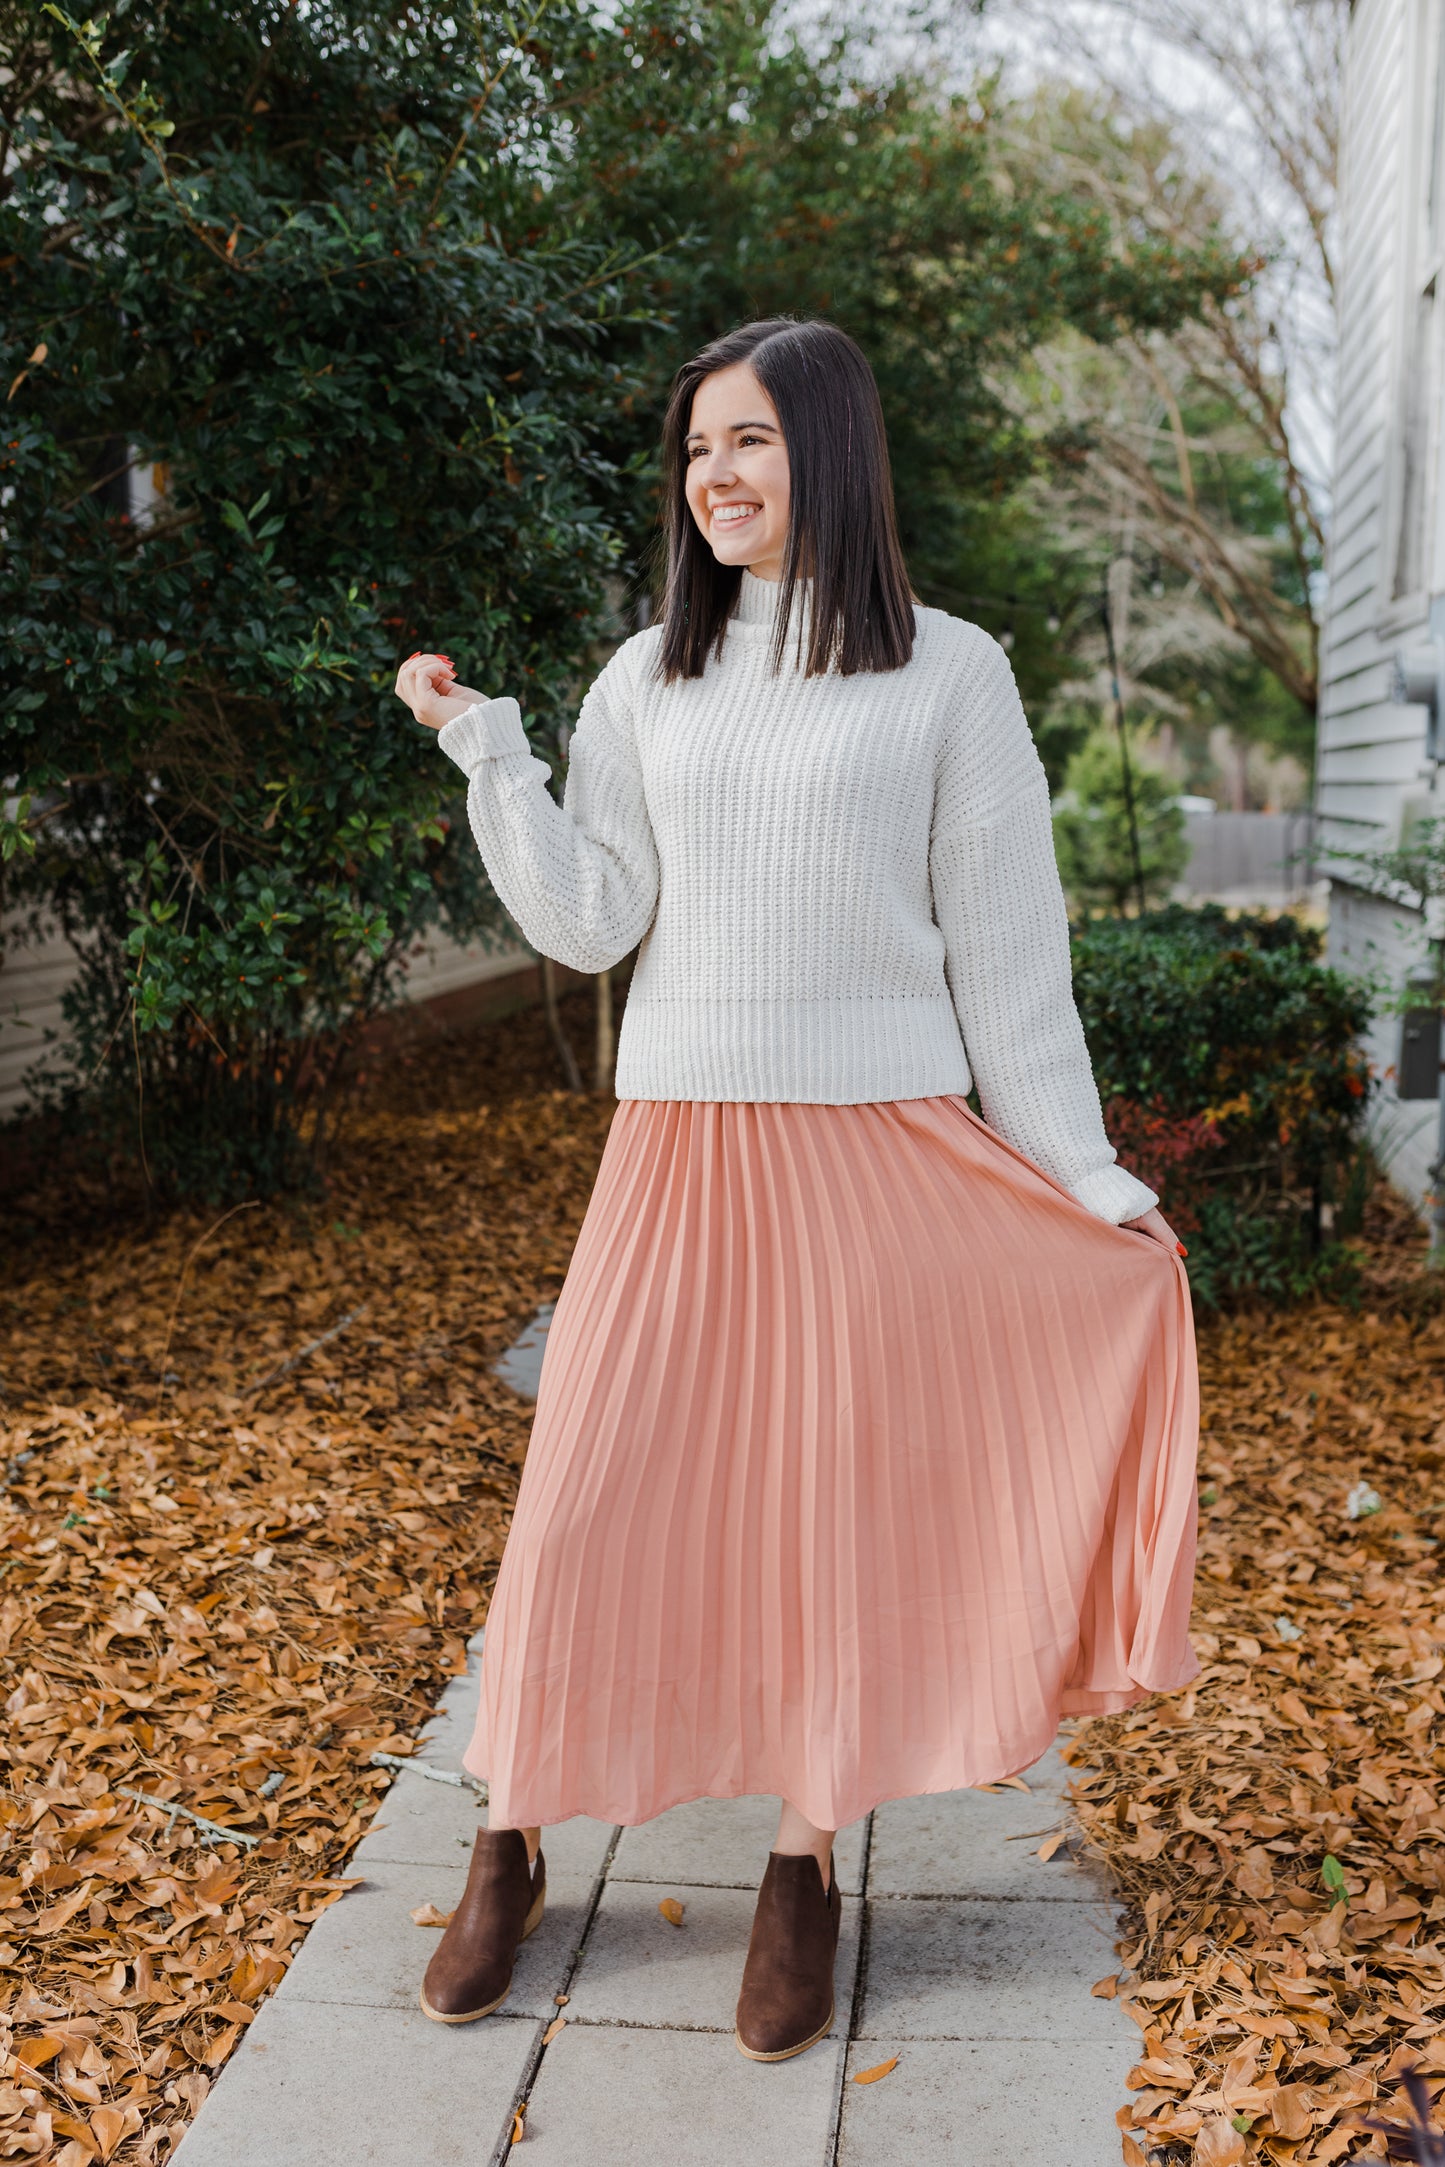 Ready for the Party Chiffon Skirt